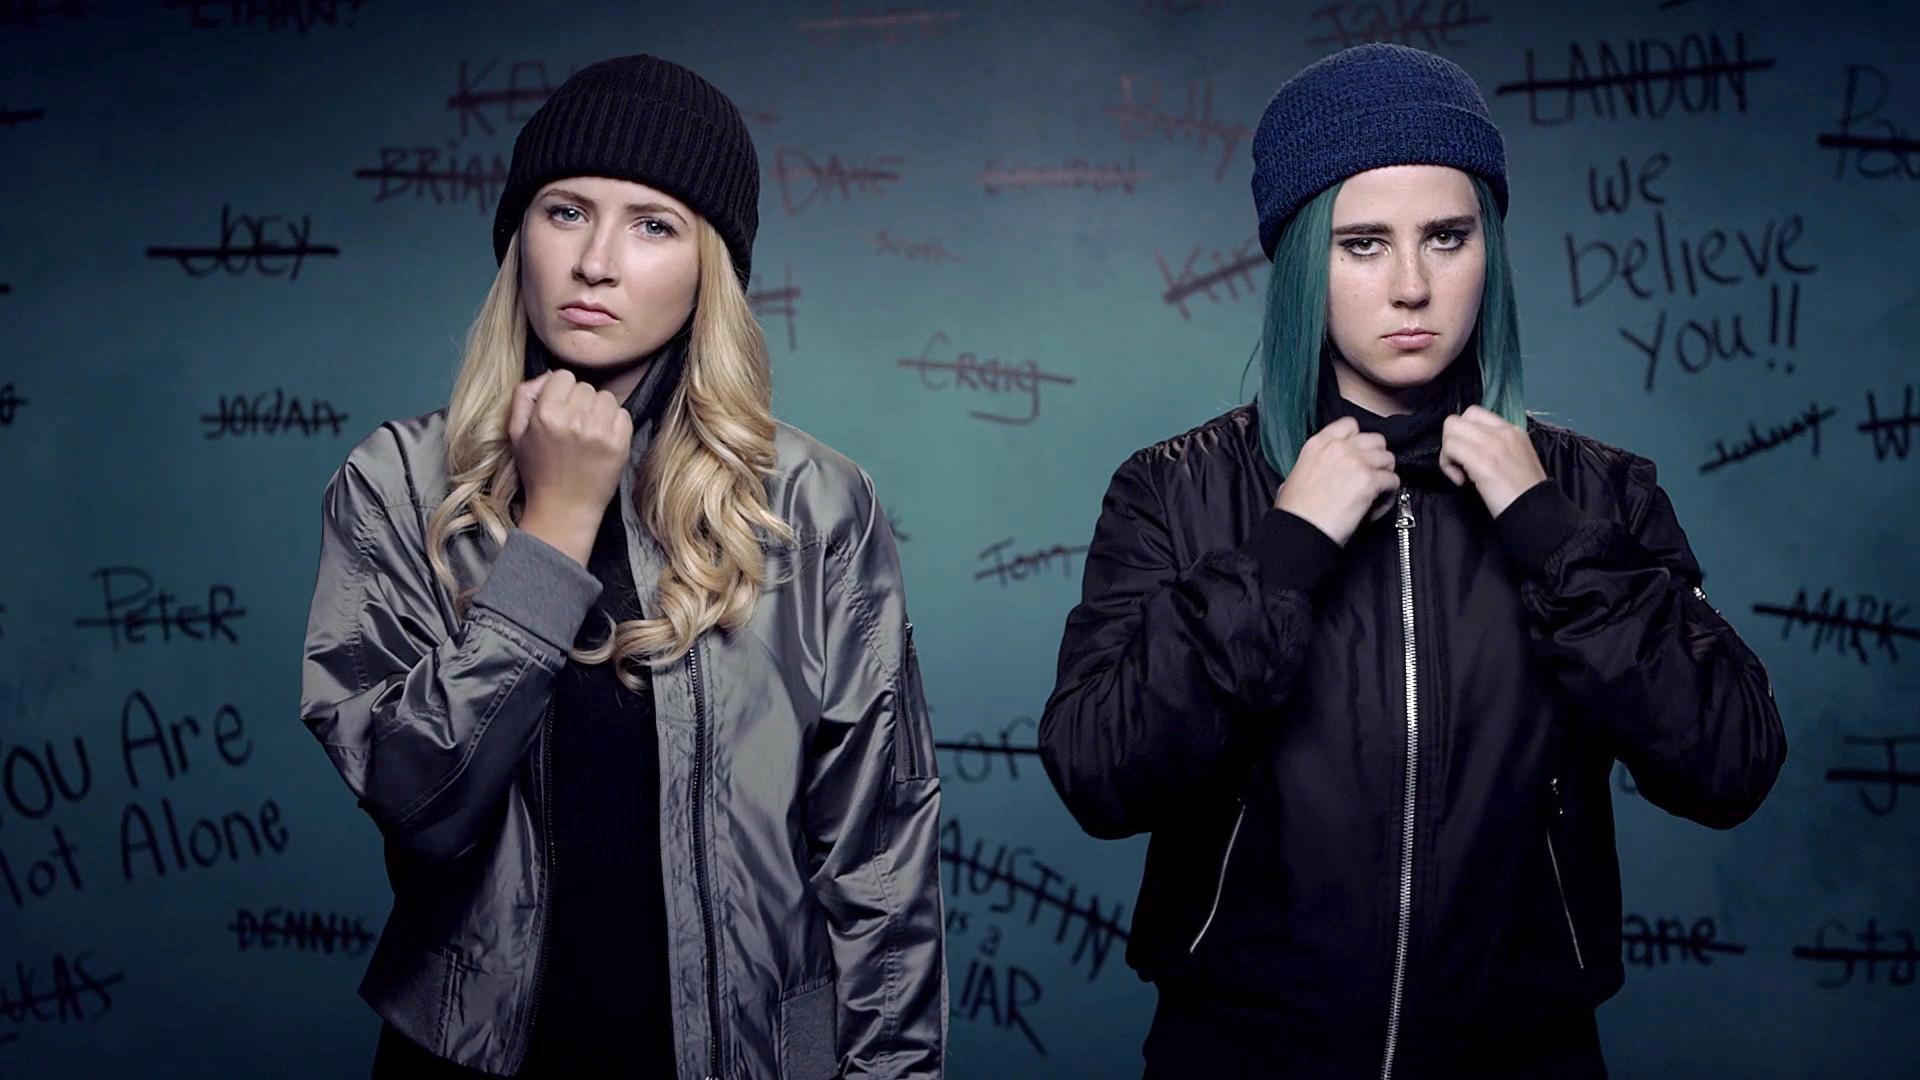 Two girls in beanies stand next to each other